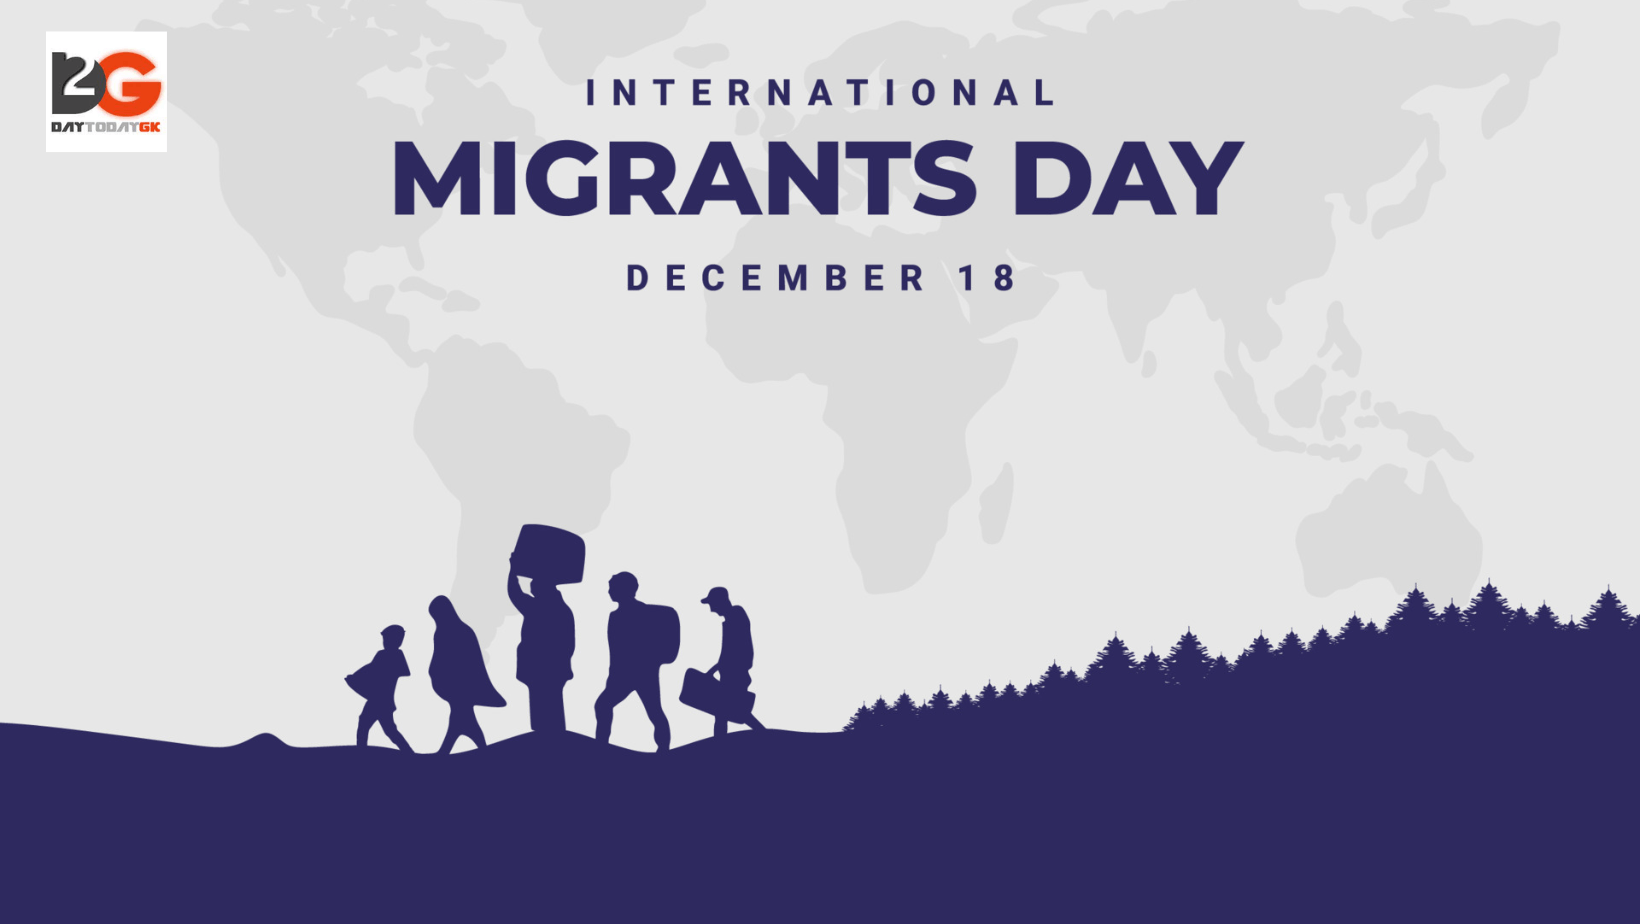 International Migrants Day 2023 is observed on December 18